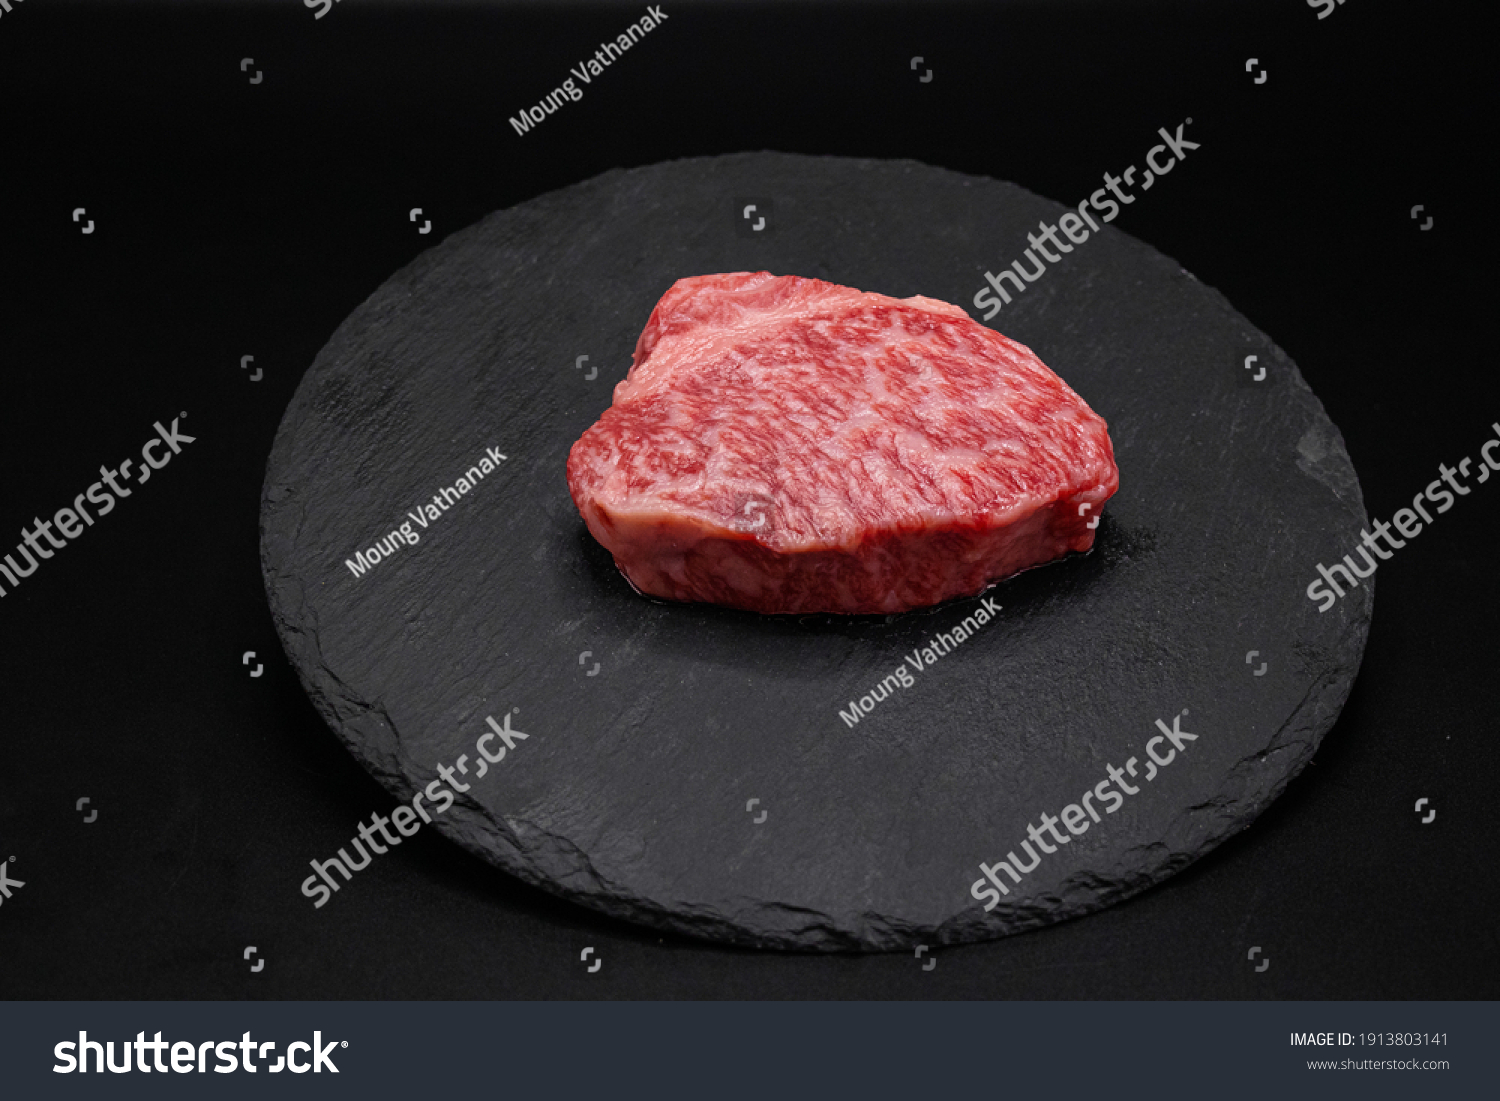 Kobe A4 Tenderloin. Kobe beef is some of the rarest and most highly-prized varieties of wagyu, and commonly fetches some of the highest price tags for beef in the world.  #1913803141